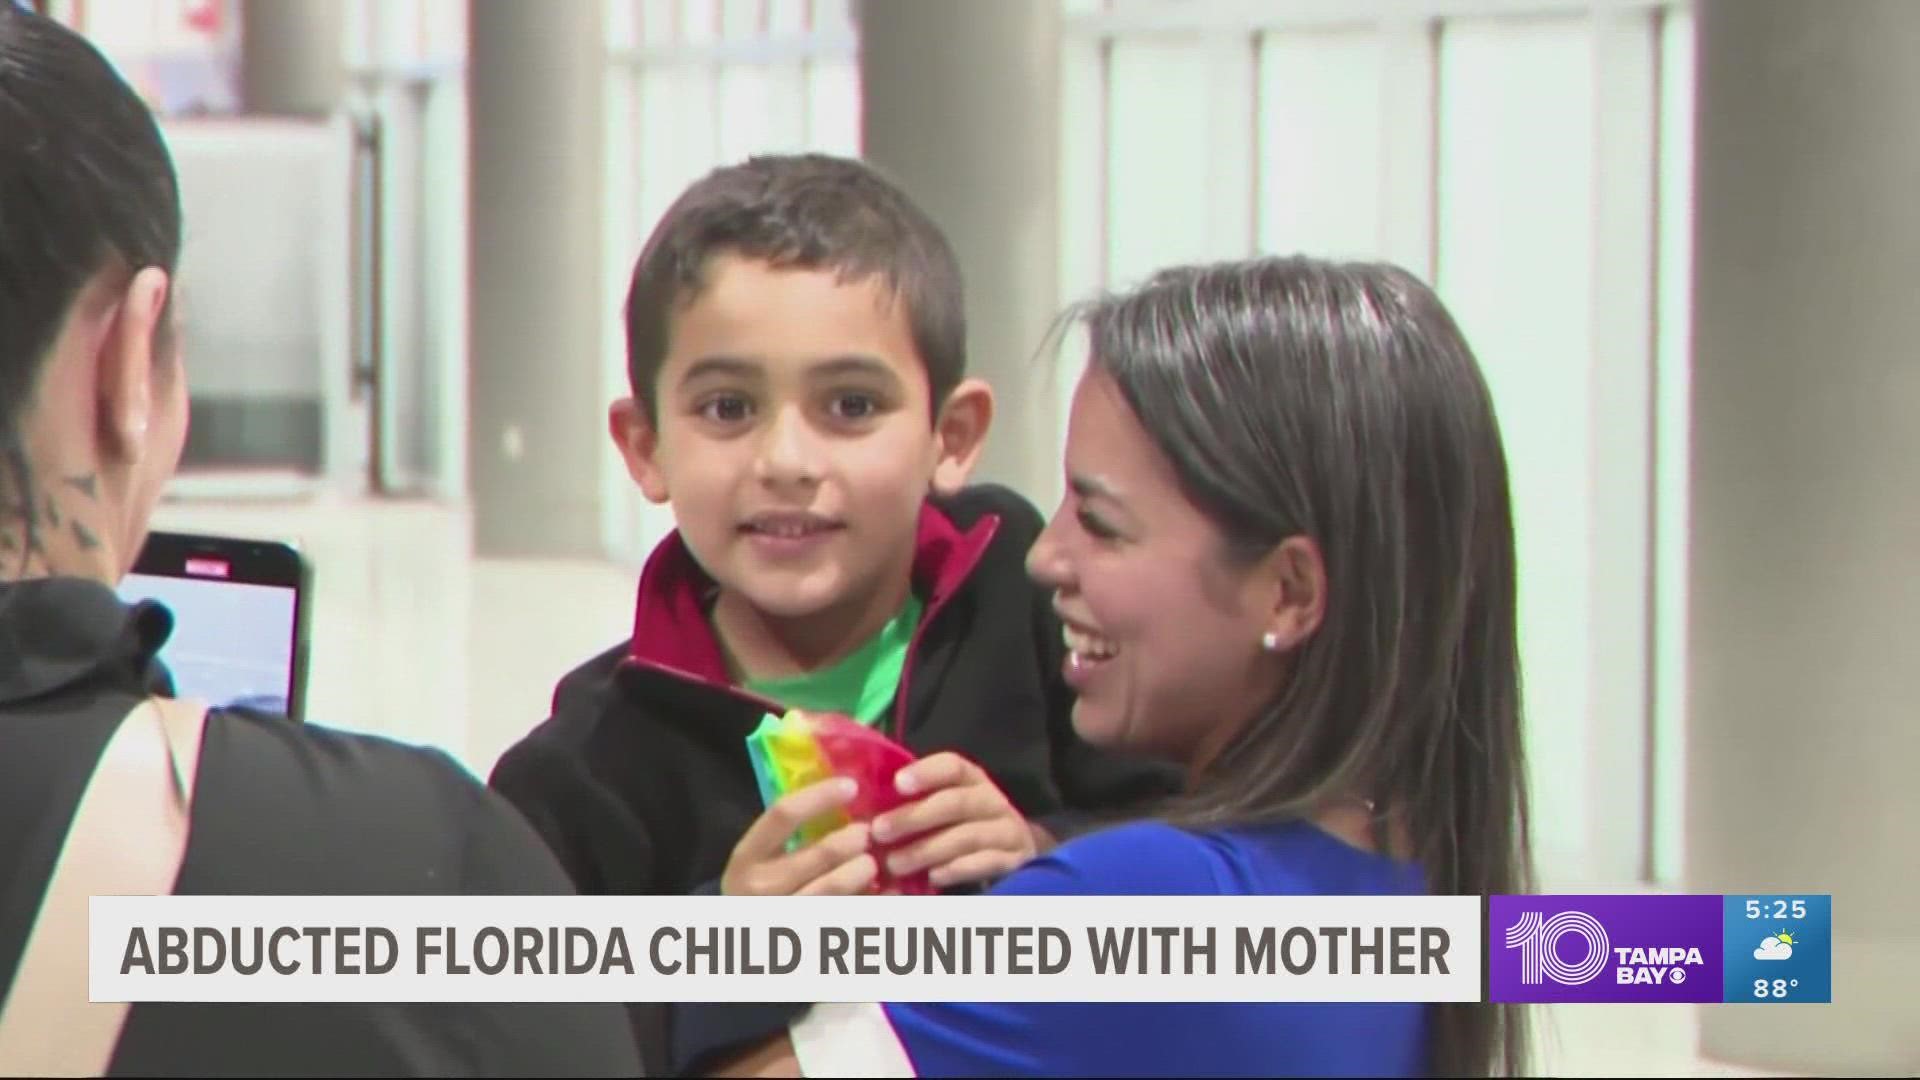 The 6-year-old was reportedly abducted two months ago by his father, Jorge Morales, and his grandmother Lilliam Pena Morales.